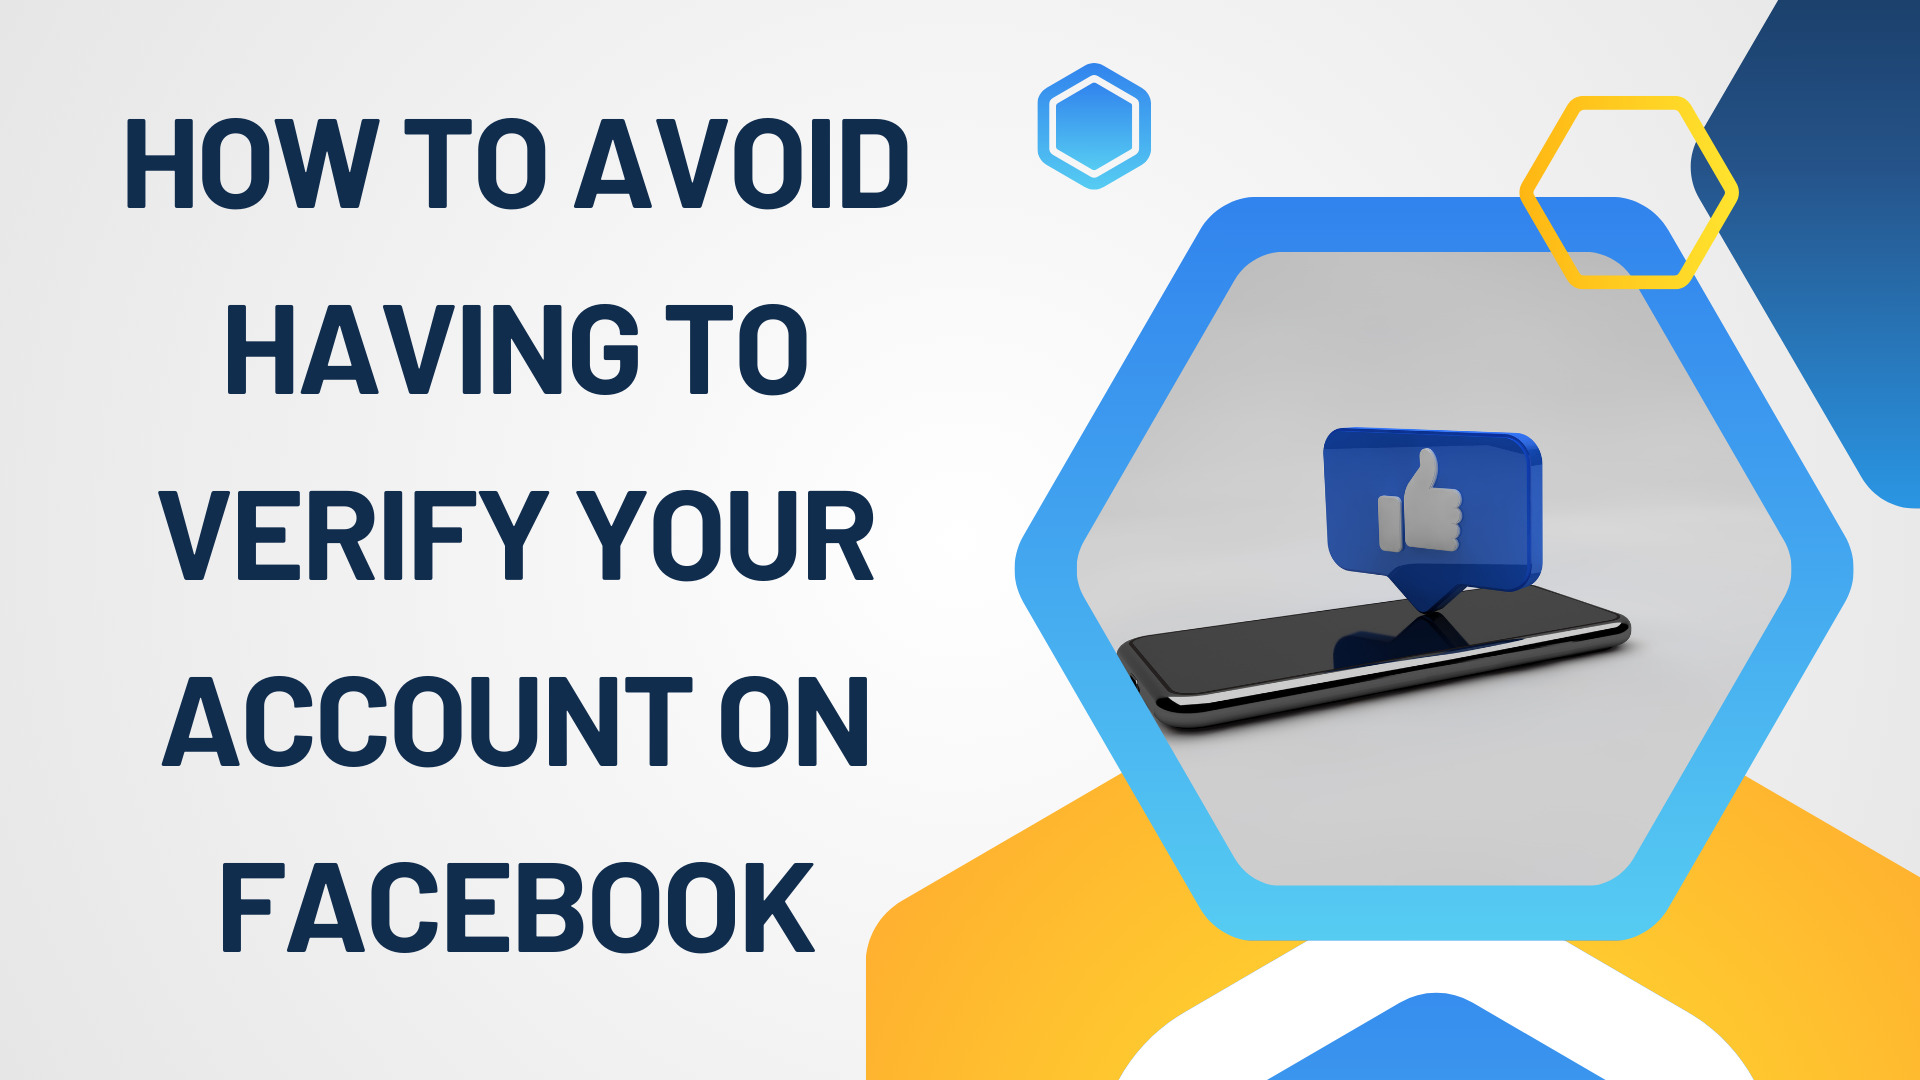 How to avoid having to verify your account on Facebook